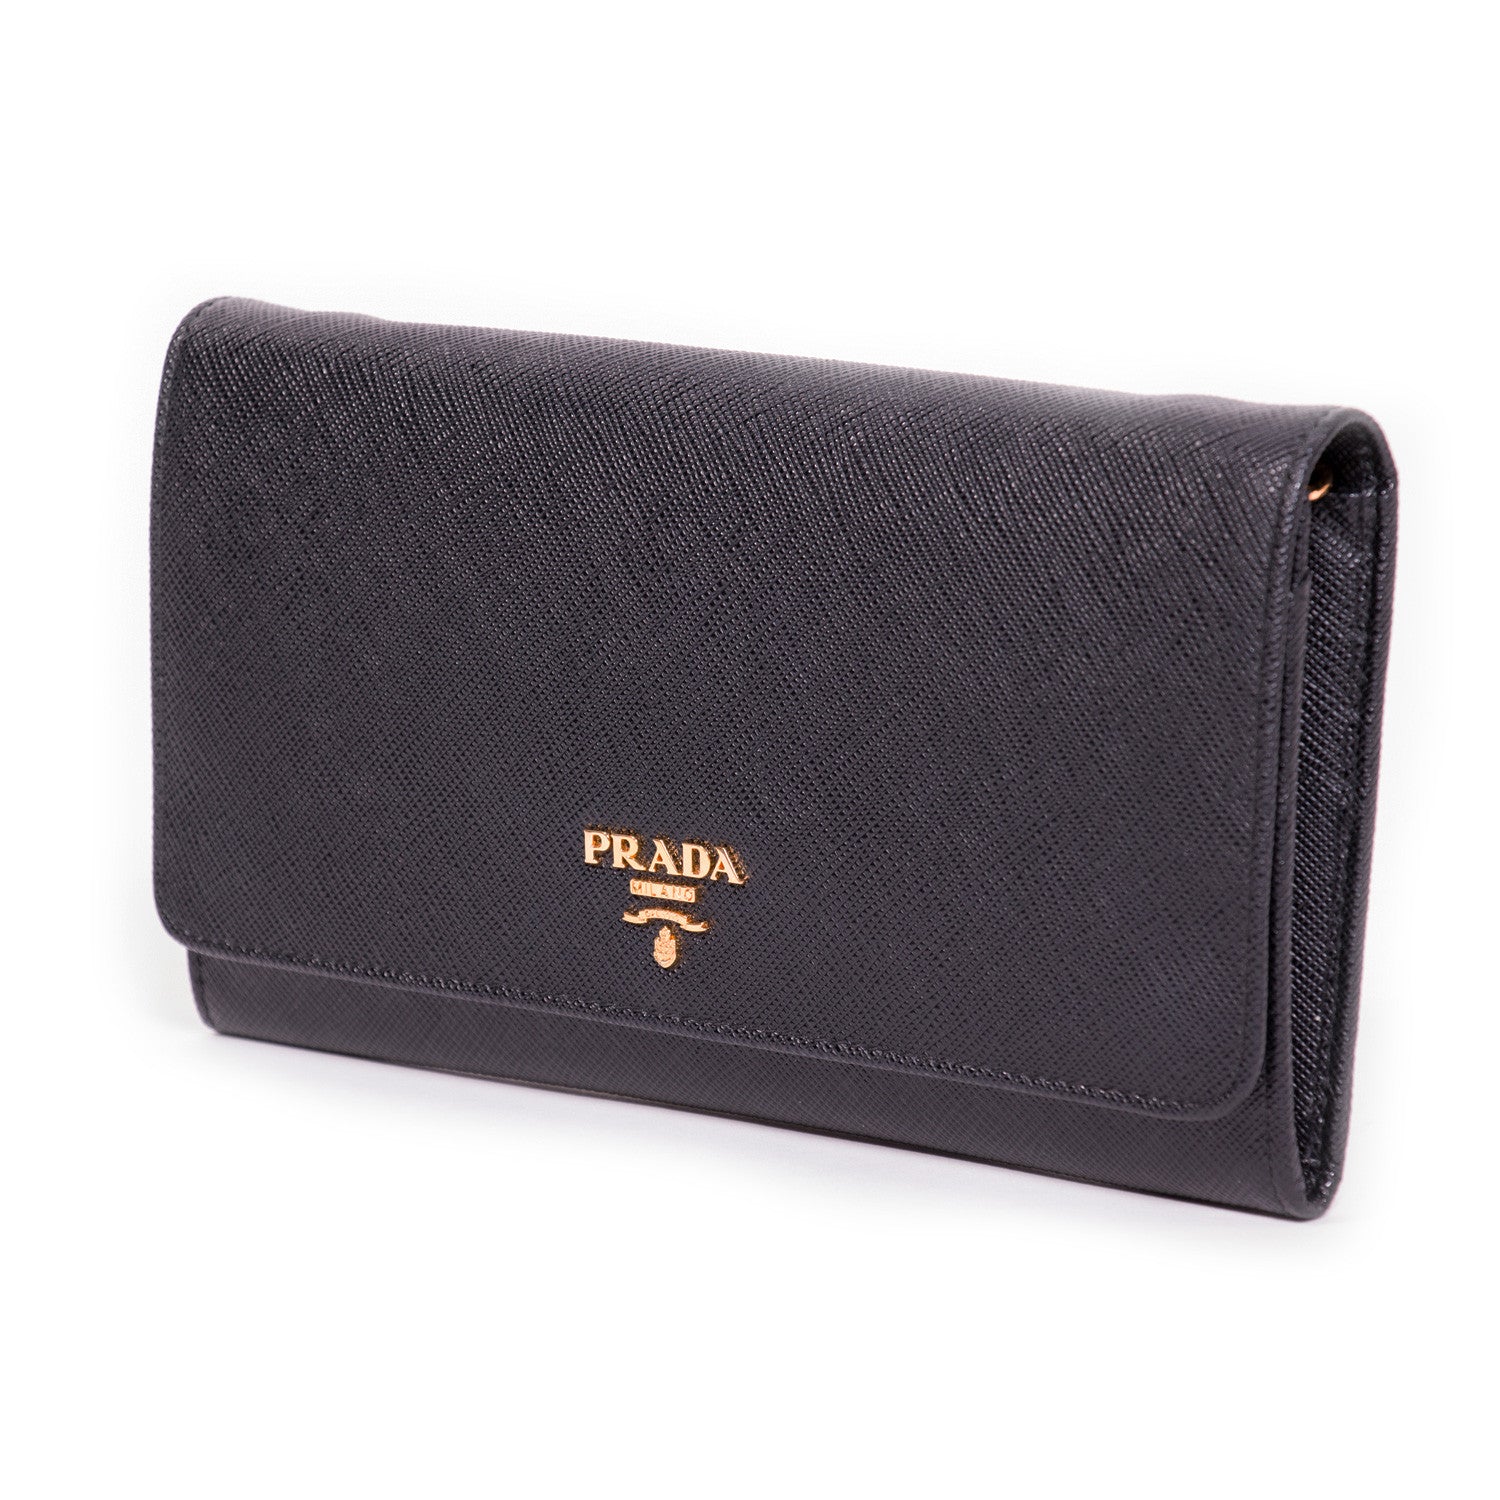 Shop authentic Prada Leather Chain Wallet at revogue for just USD 699.00